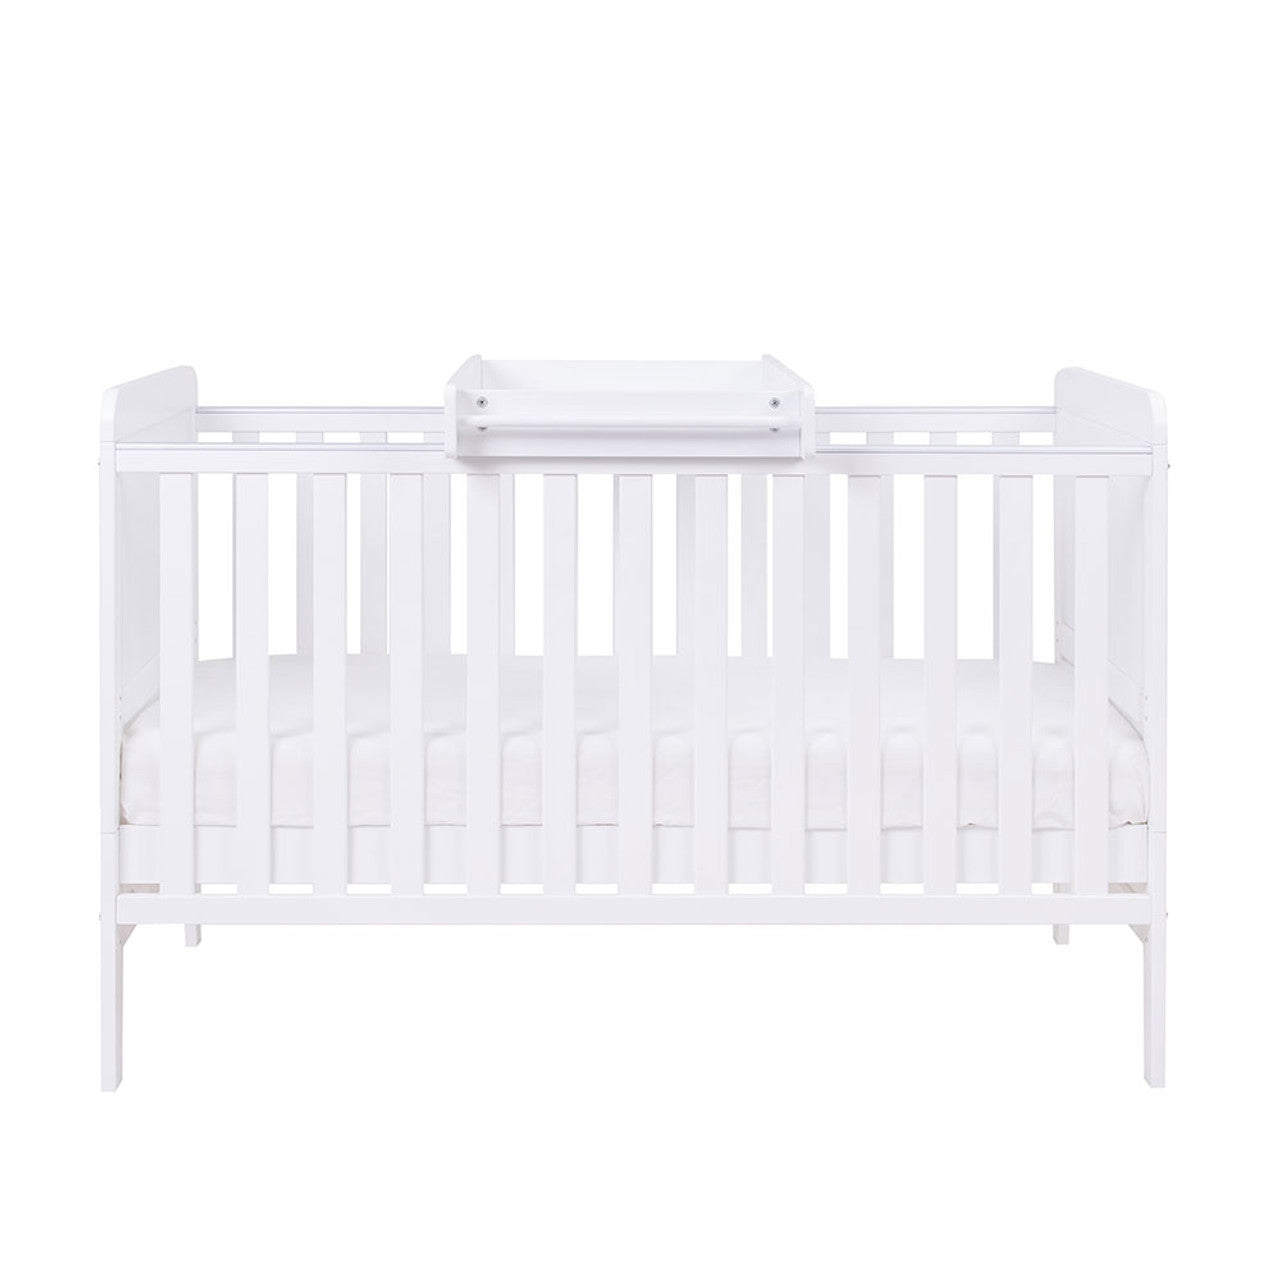 Tutti Bambini Rio 2 Piece Room Set - White - For Your Little One